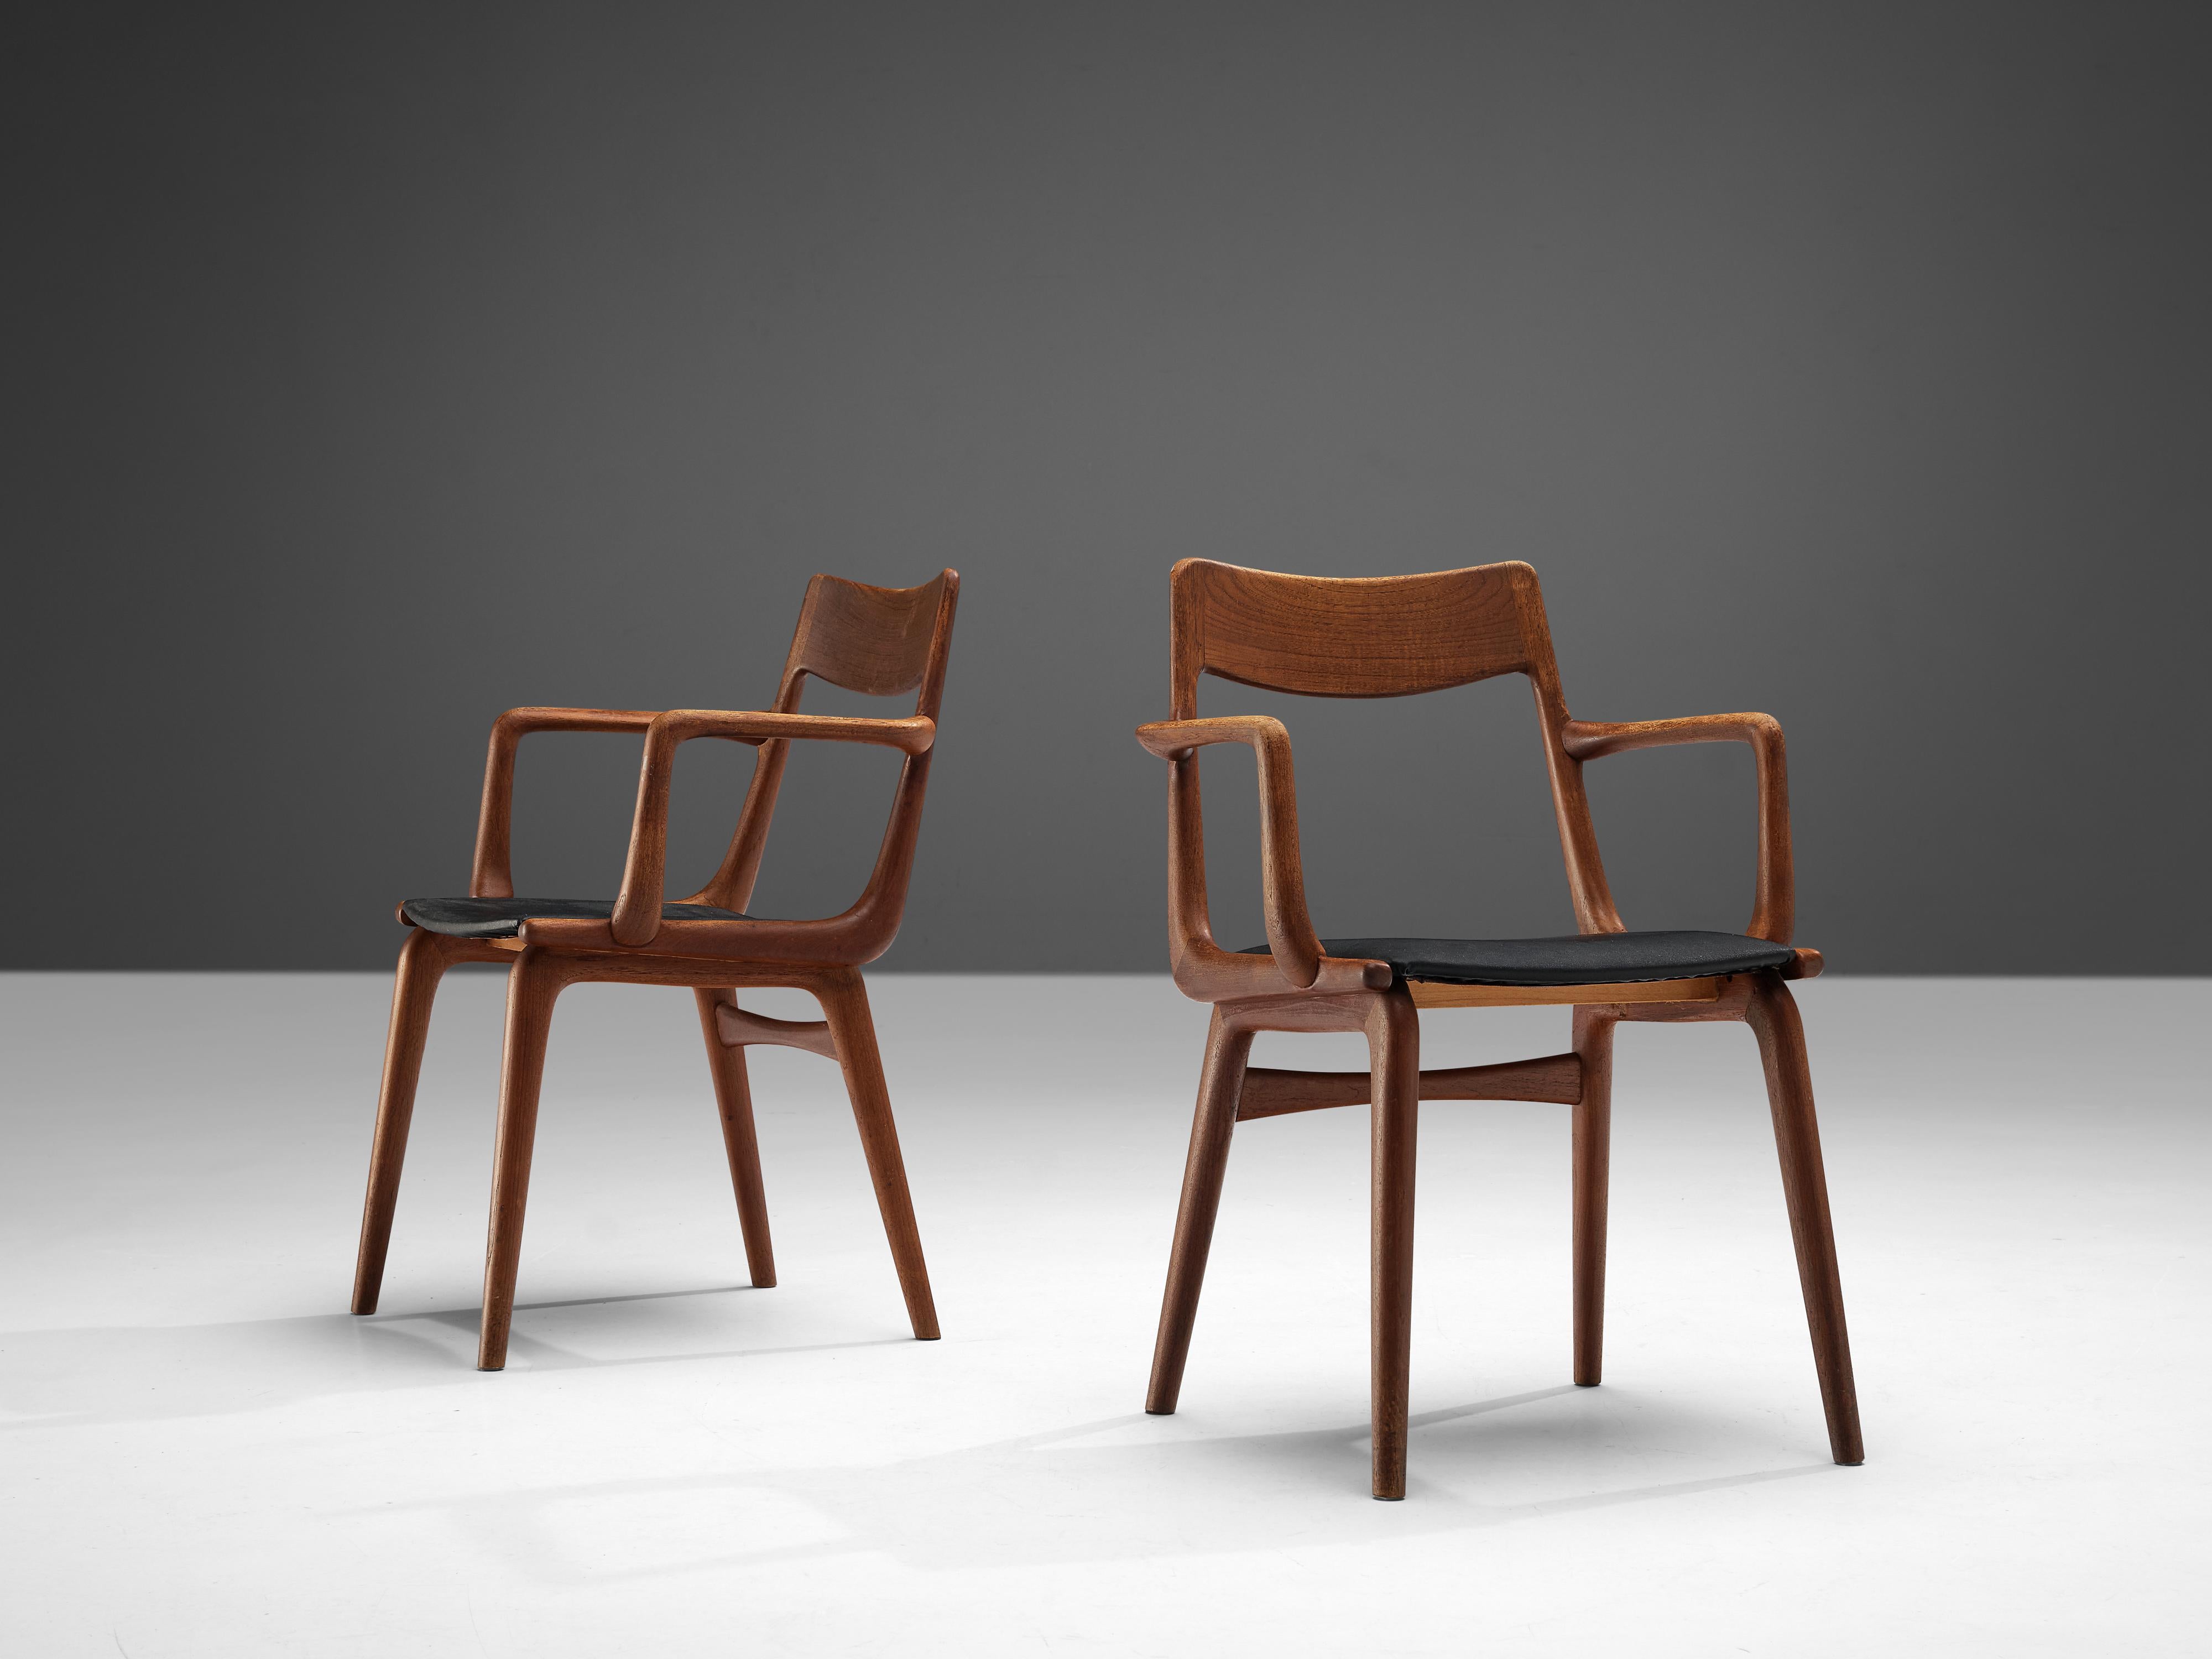 Alfred Christiansen for Slagelse Mobelvaerk, 'Boomerang' armchairs model ‘370A’, teak, leatherette, Denmark, 1950s.

Pair of sculptural armchairs designed by Danish designer Alfred Christiansen. The delicate shape and craftsmanship that the frame